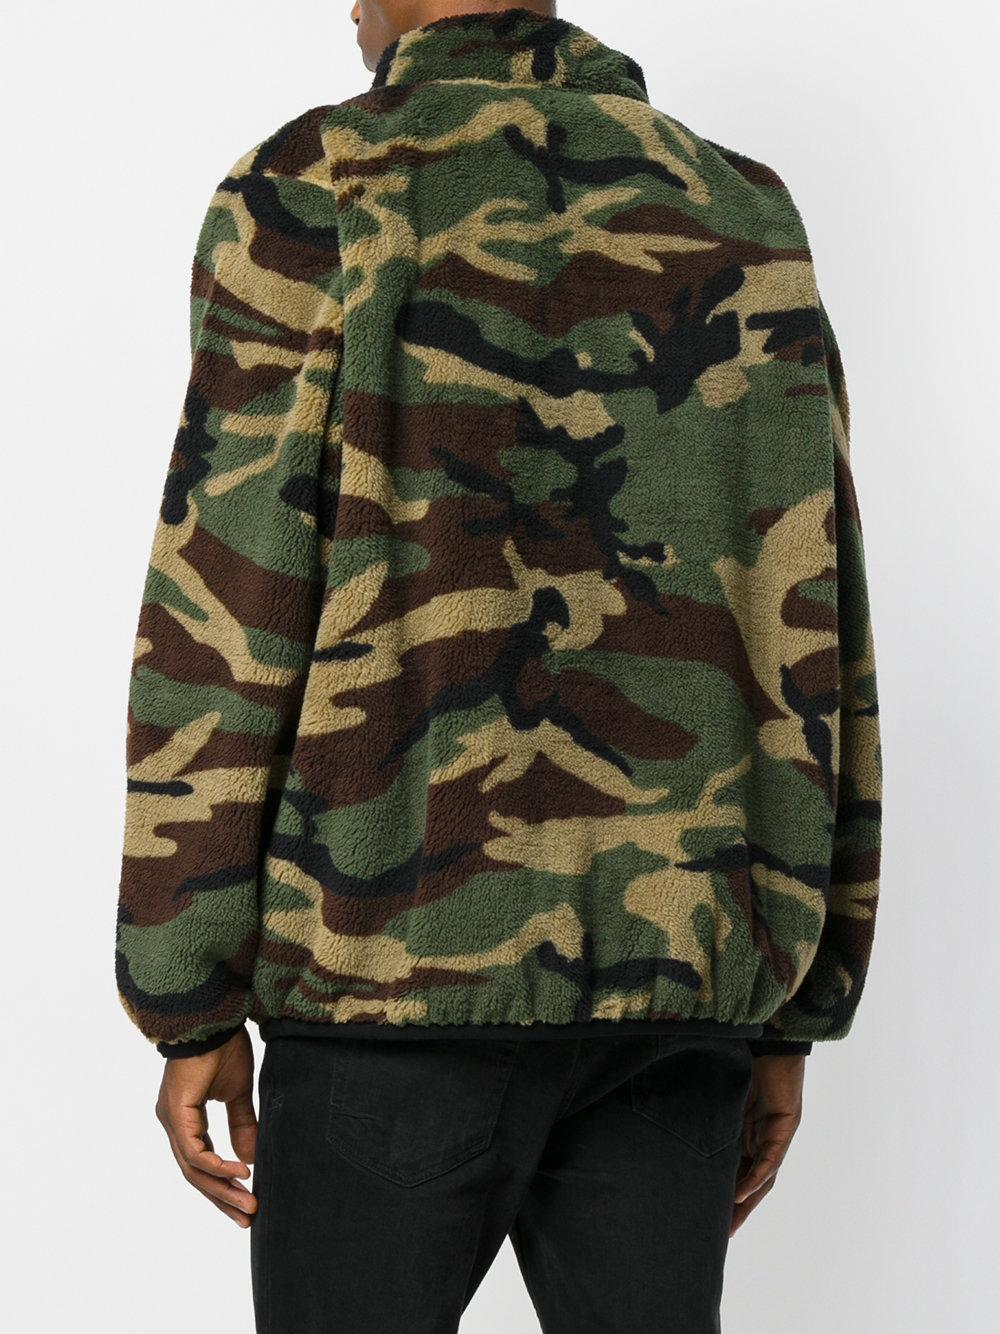 Palm Angels Wool Camouflage Zip Jumper in Green for Men - Lyst